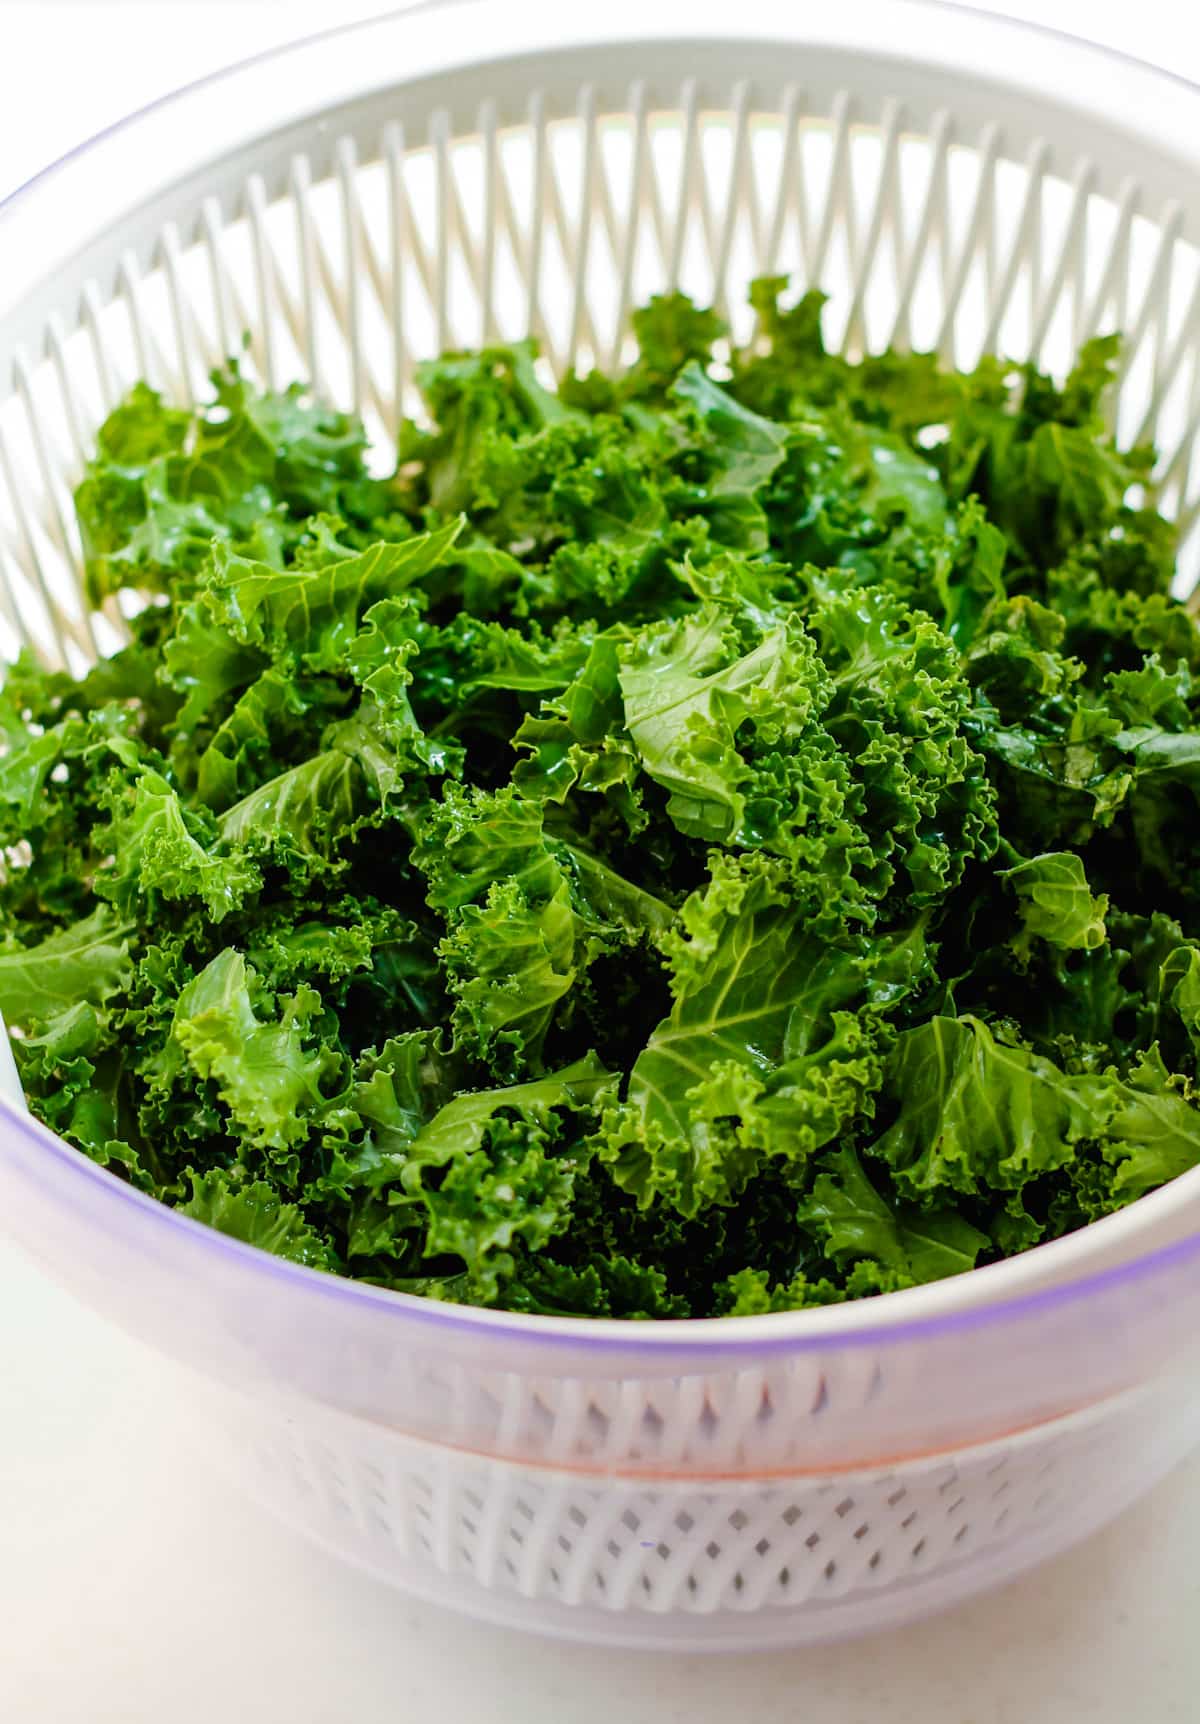 freshly washed leaves of kale in a salad spinner.